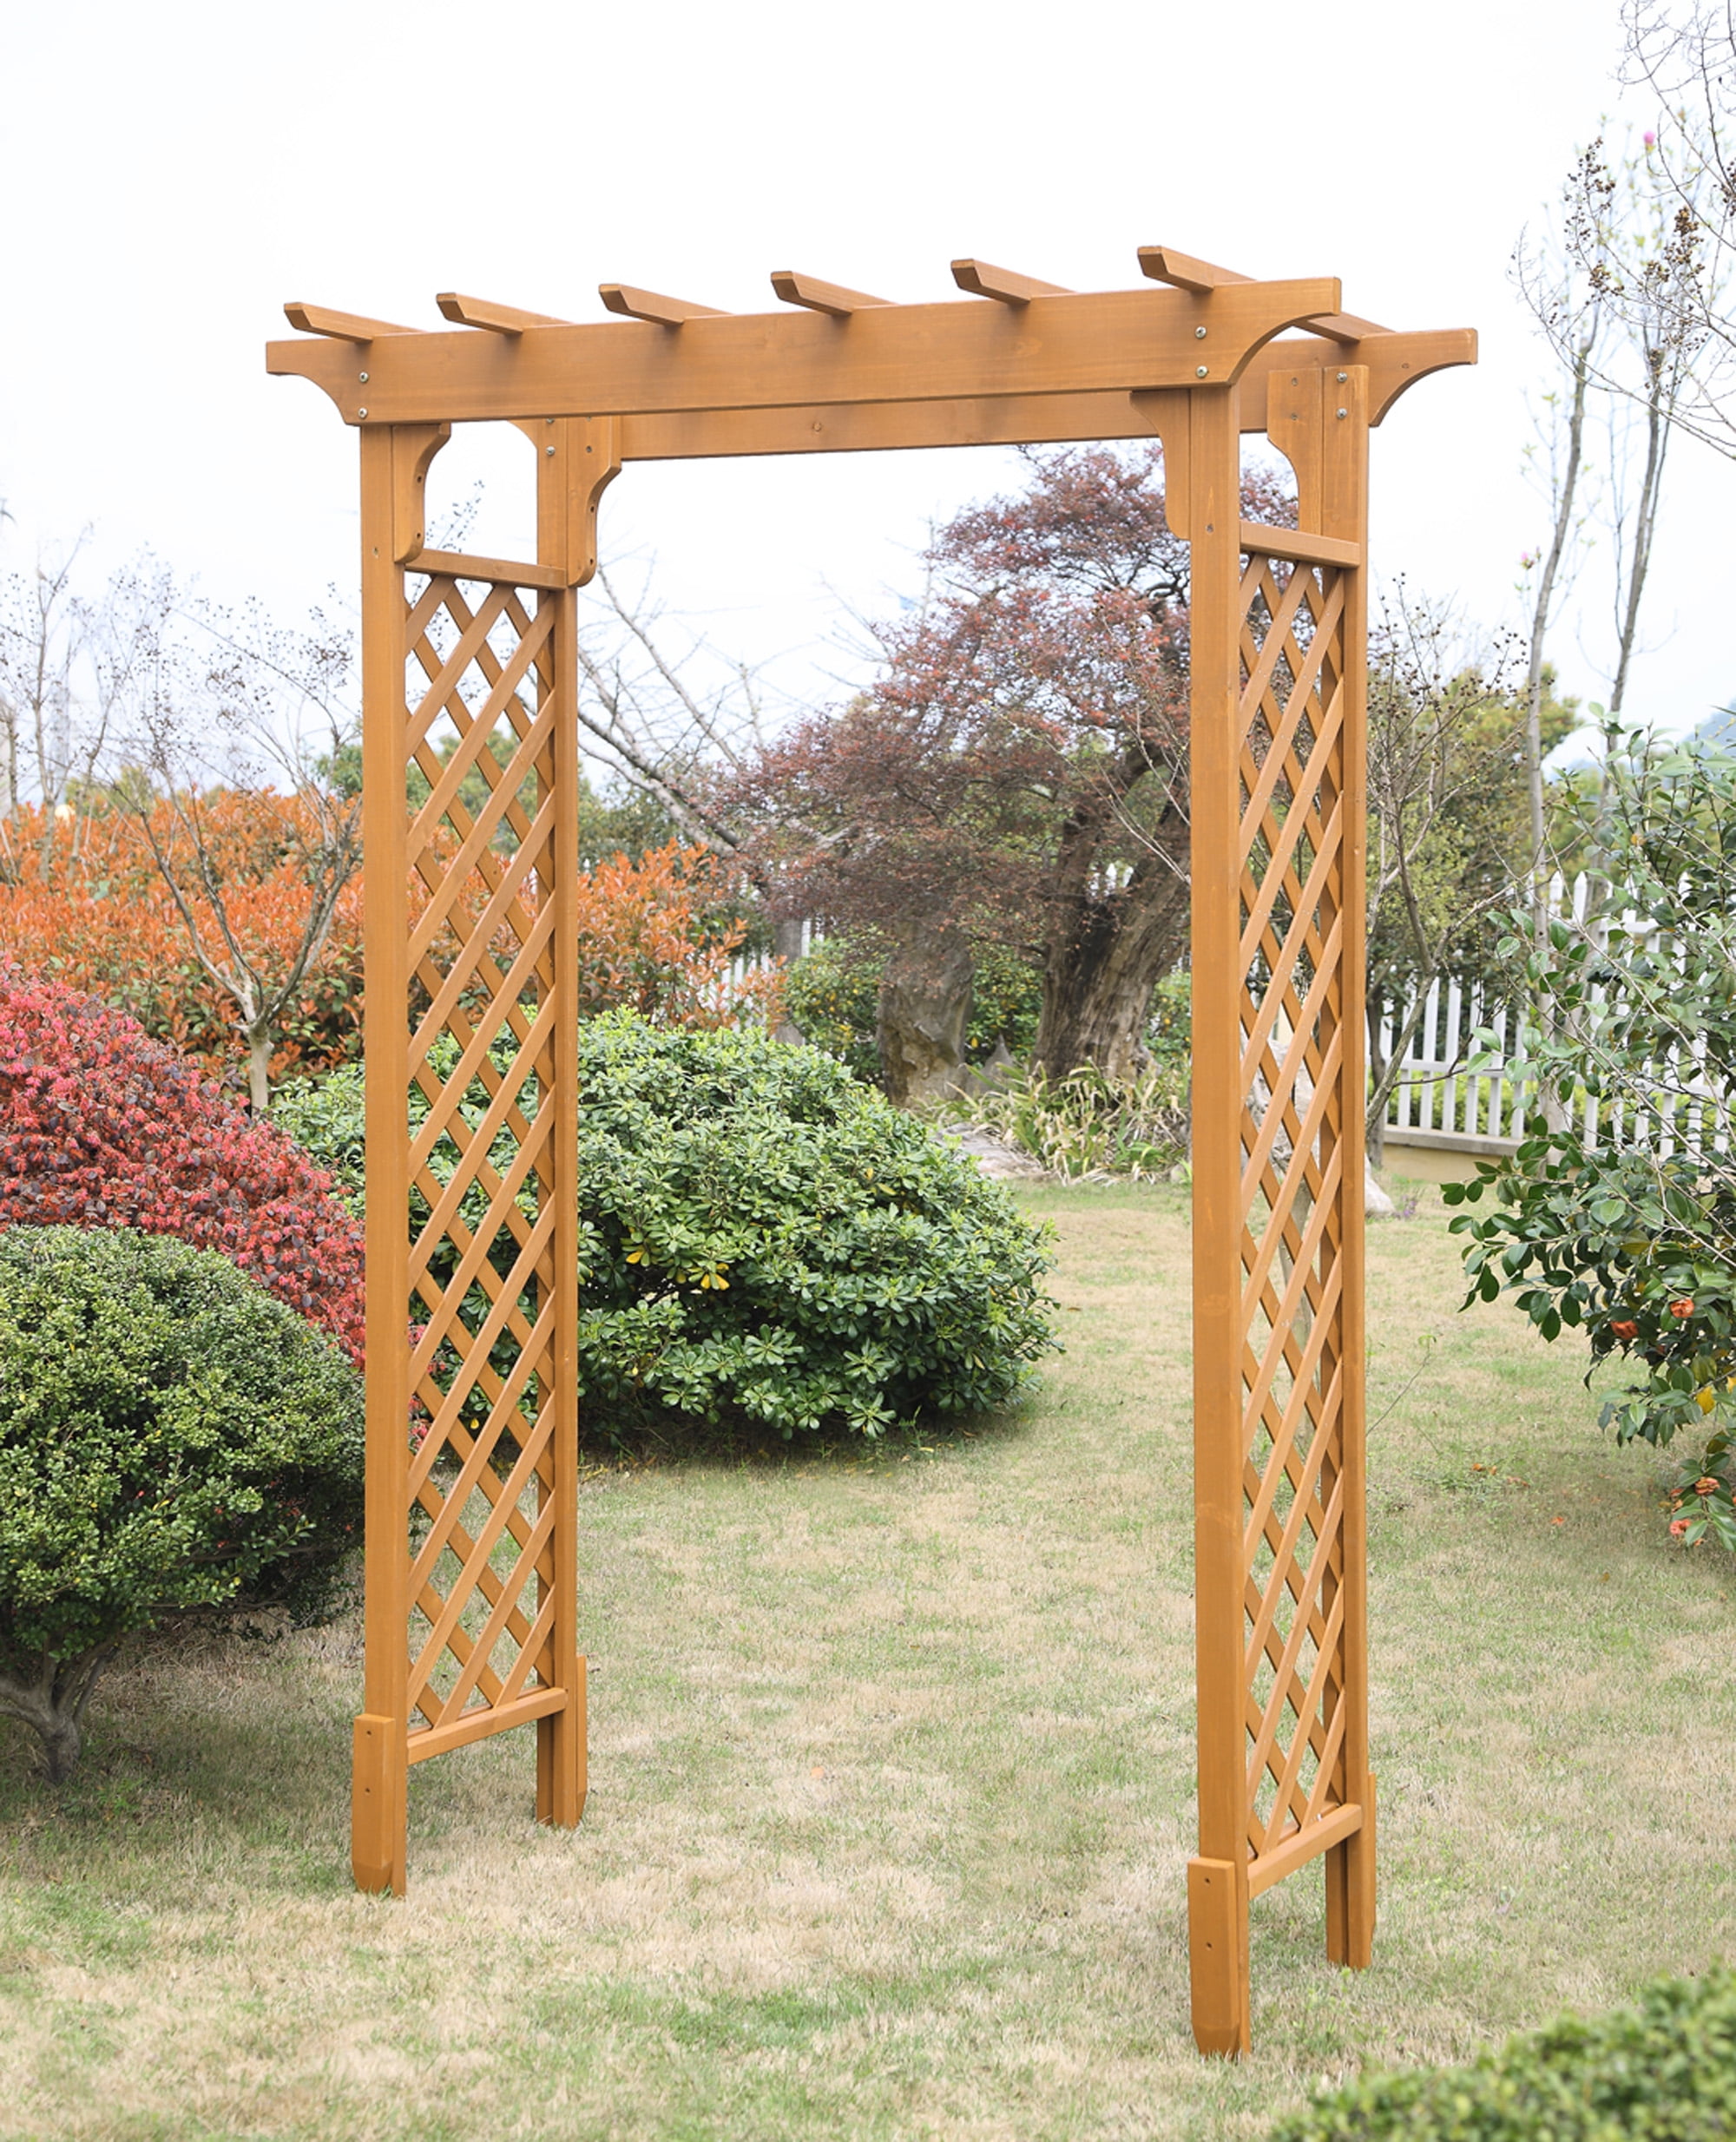 Details about   Outdoor Gardening Solid Wood Garden Arch w/ Gate Arbor Plant Climbing Support